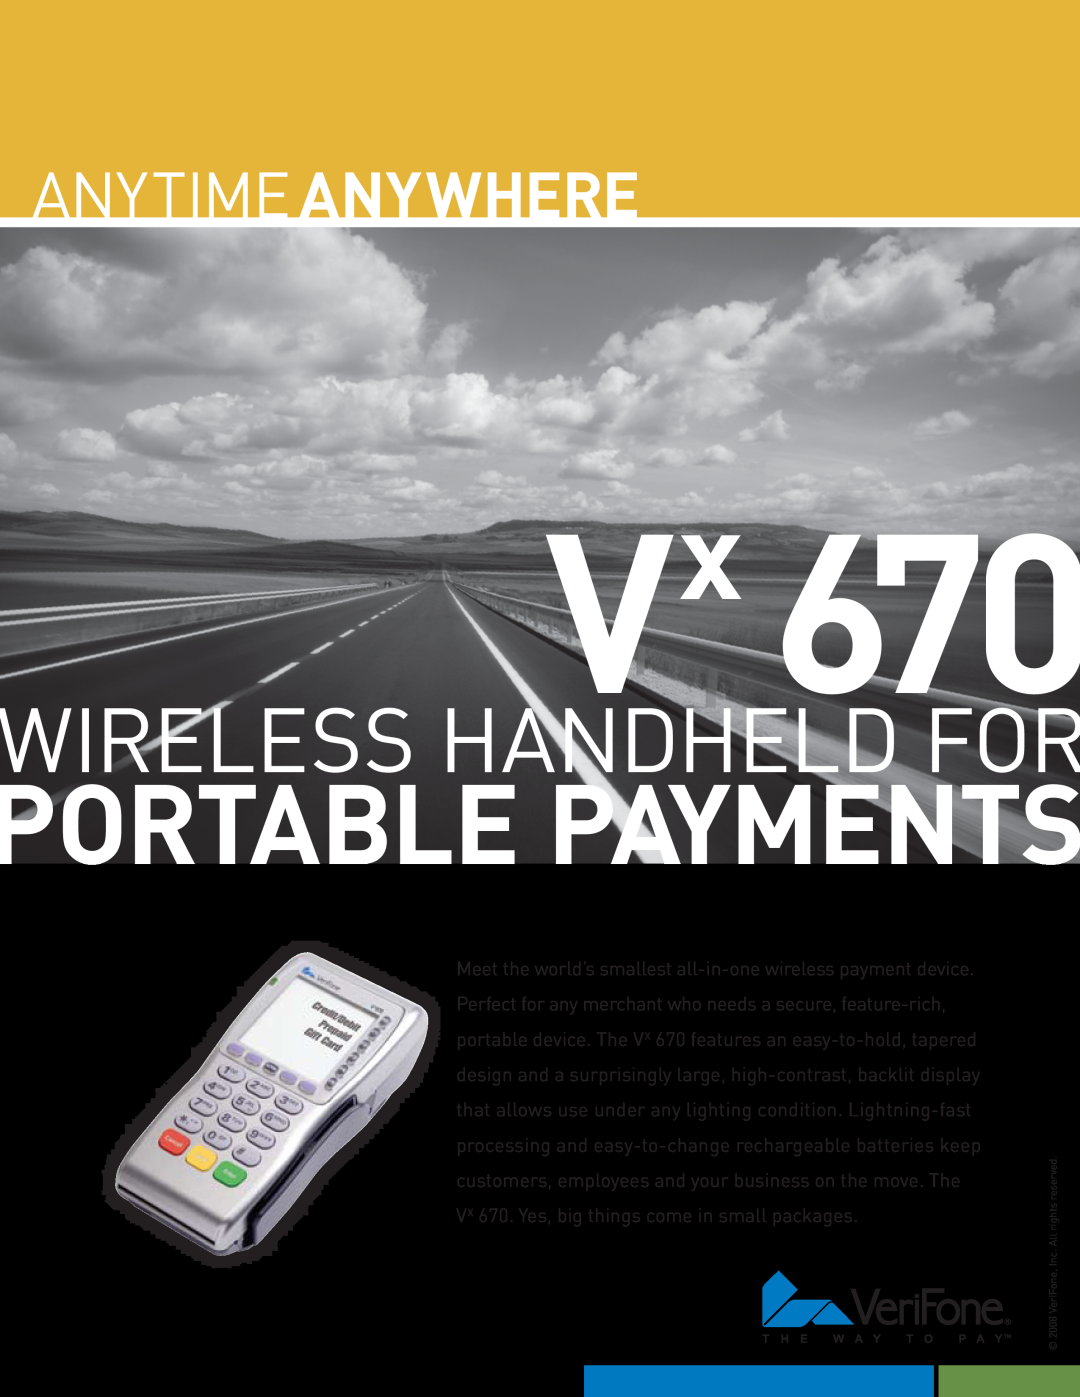 VeriFone Vx 670 manual portable payments, wireless handheld for, Anytime Anywhere 